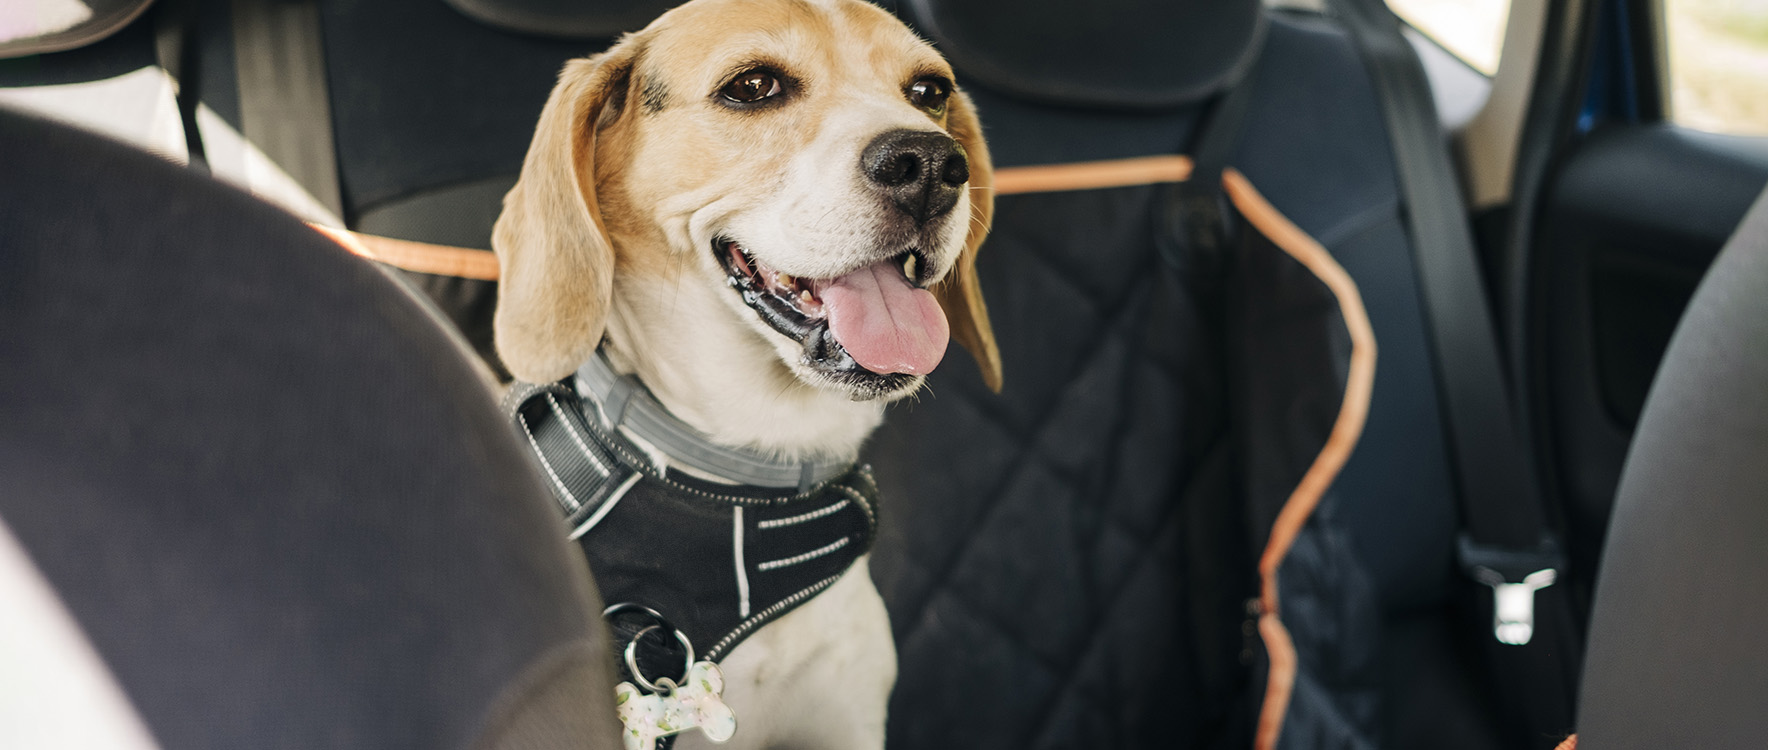 Excited beagle dog with harness inside a car